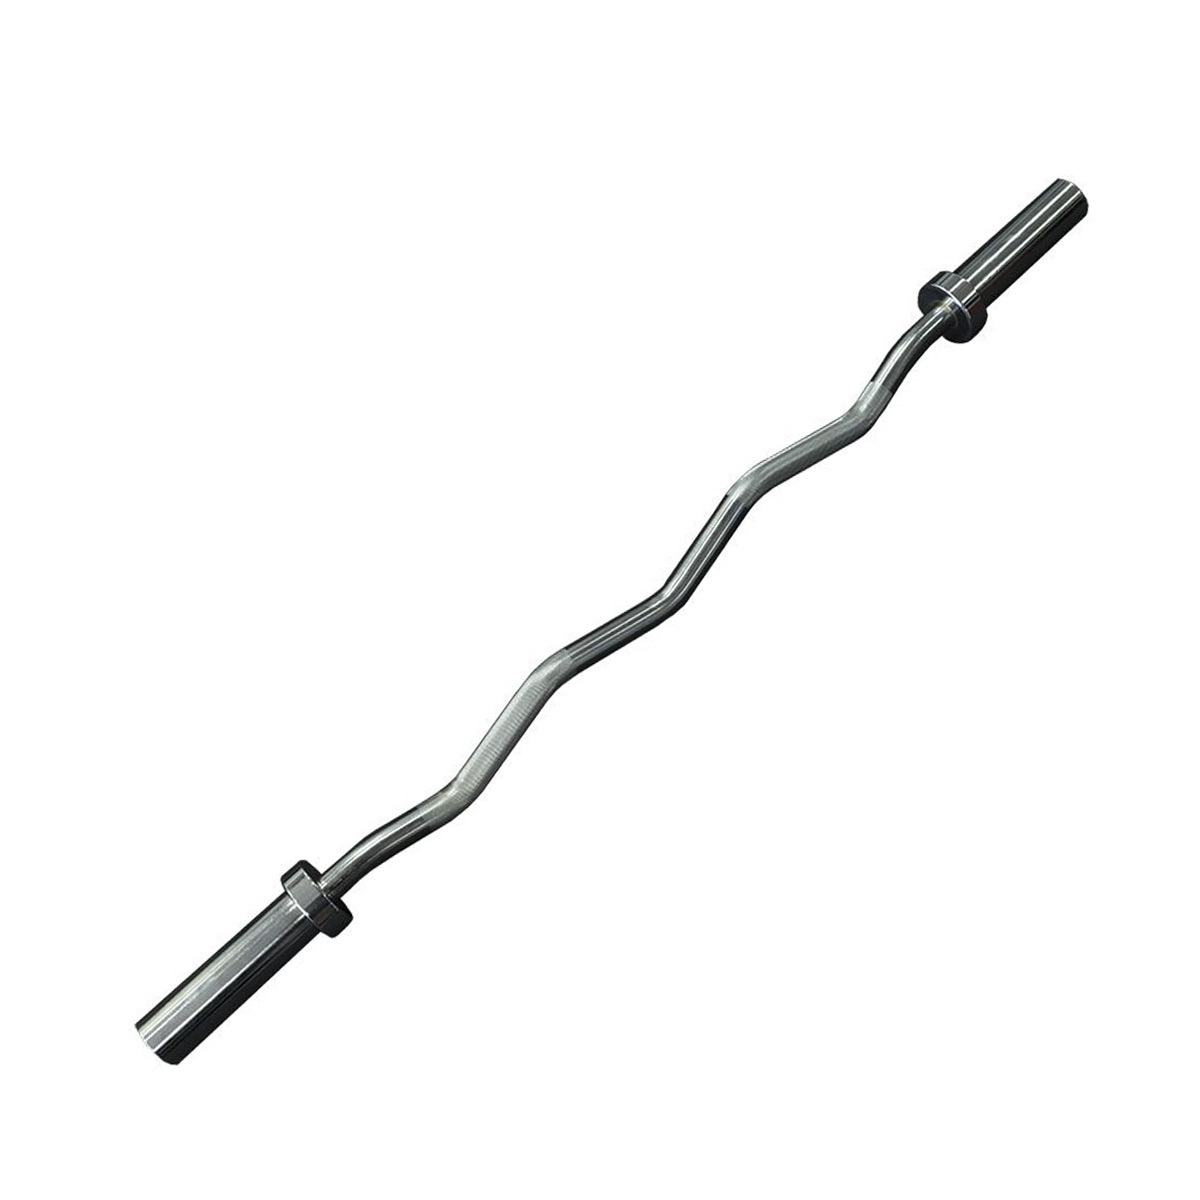 Armortech 4ft Olympic Ez Curl Barbell